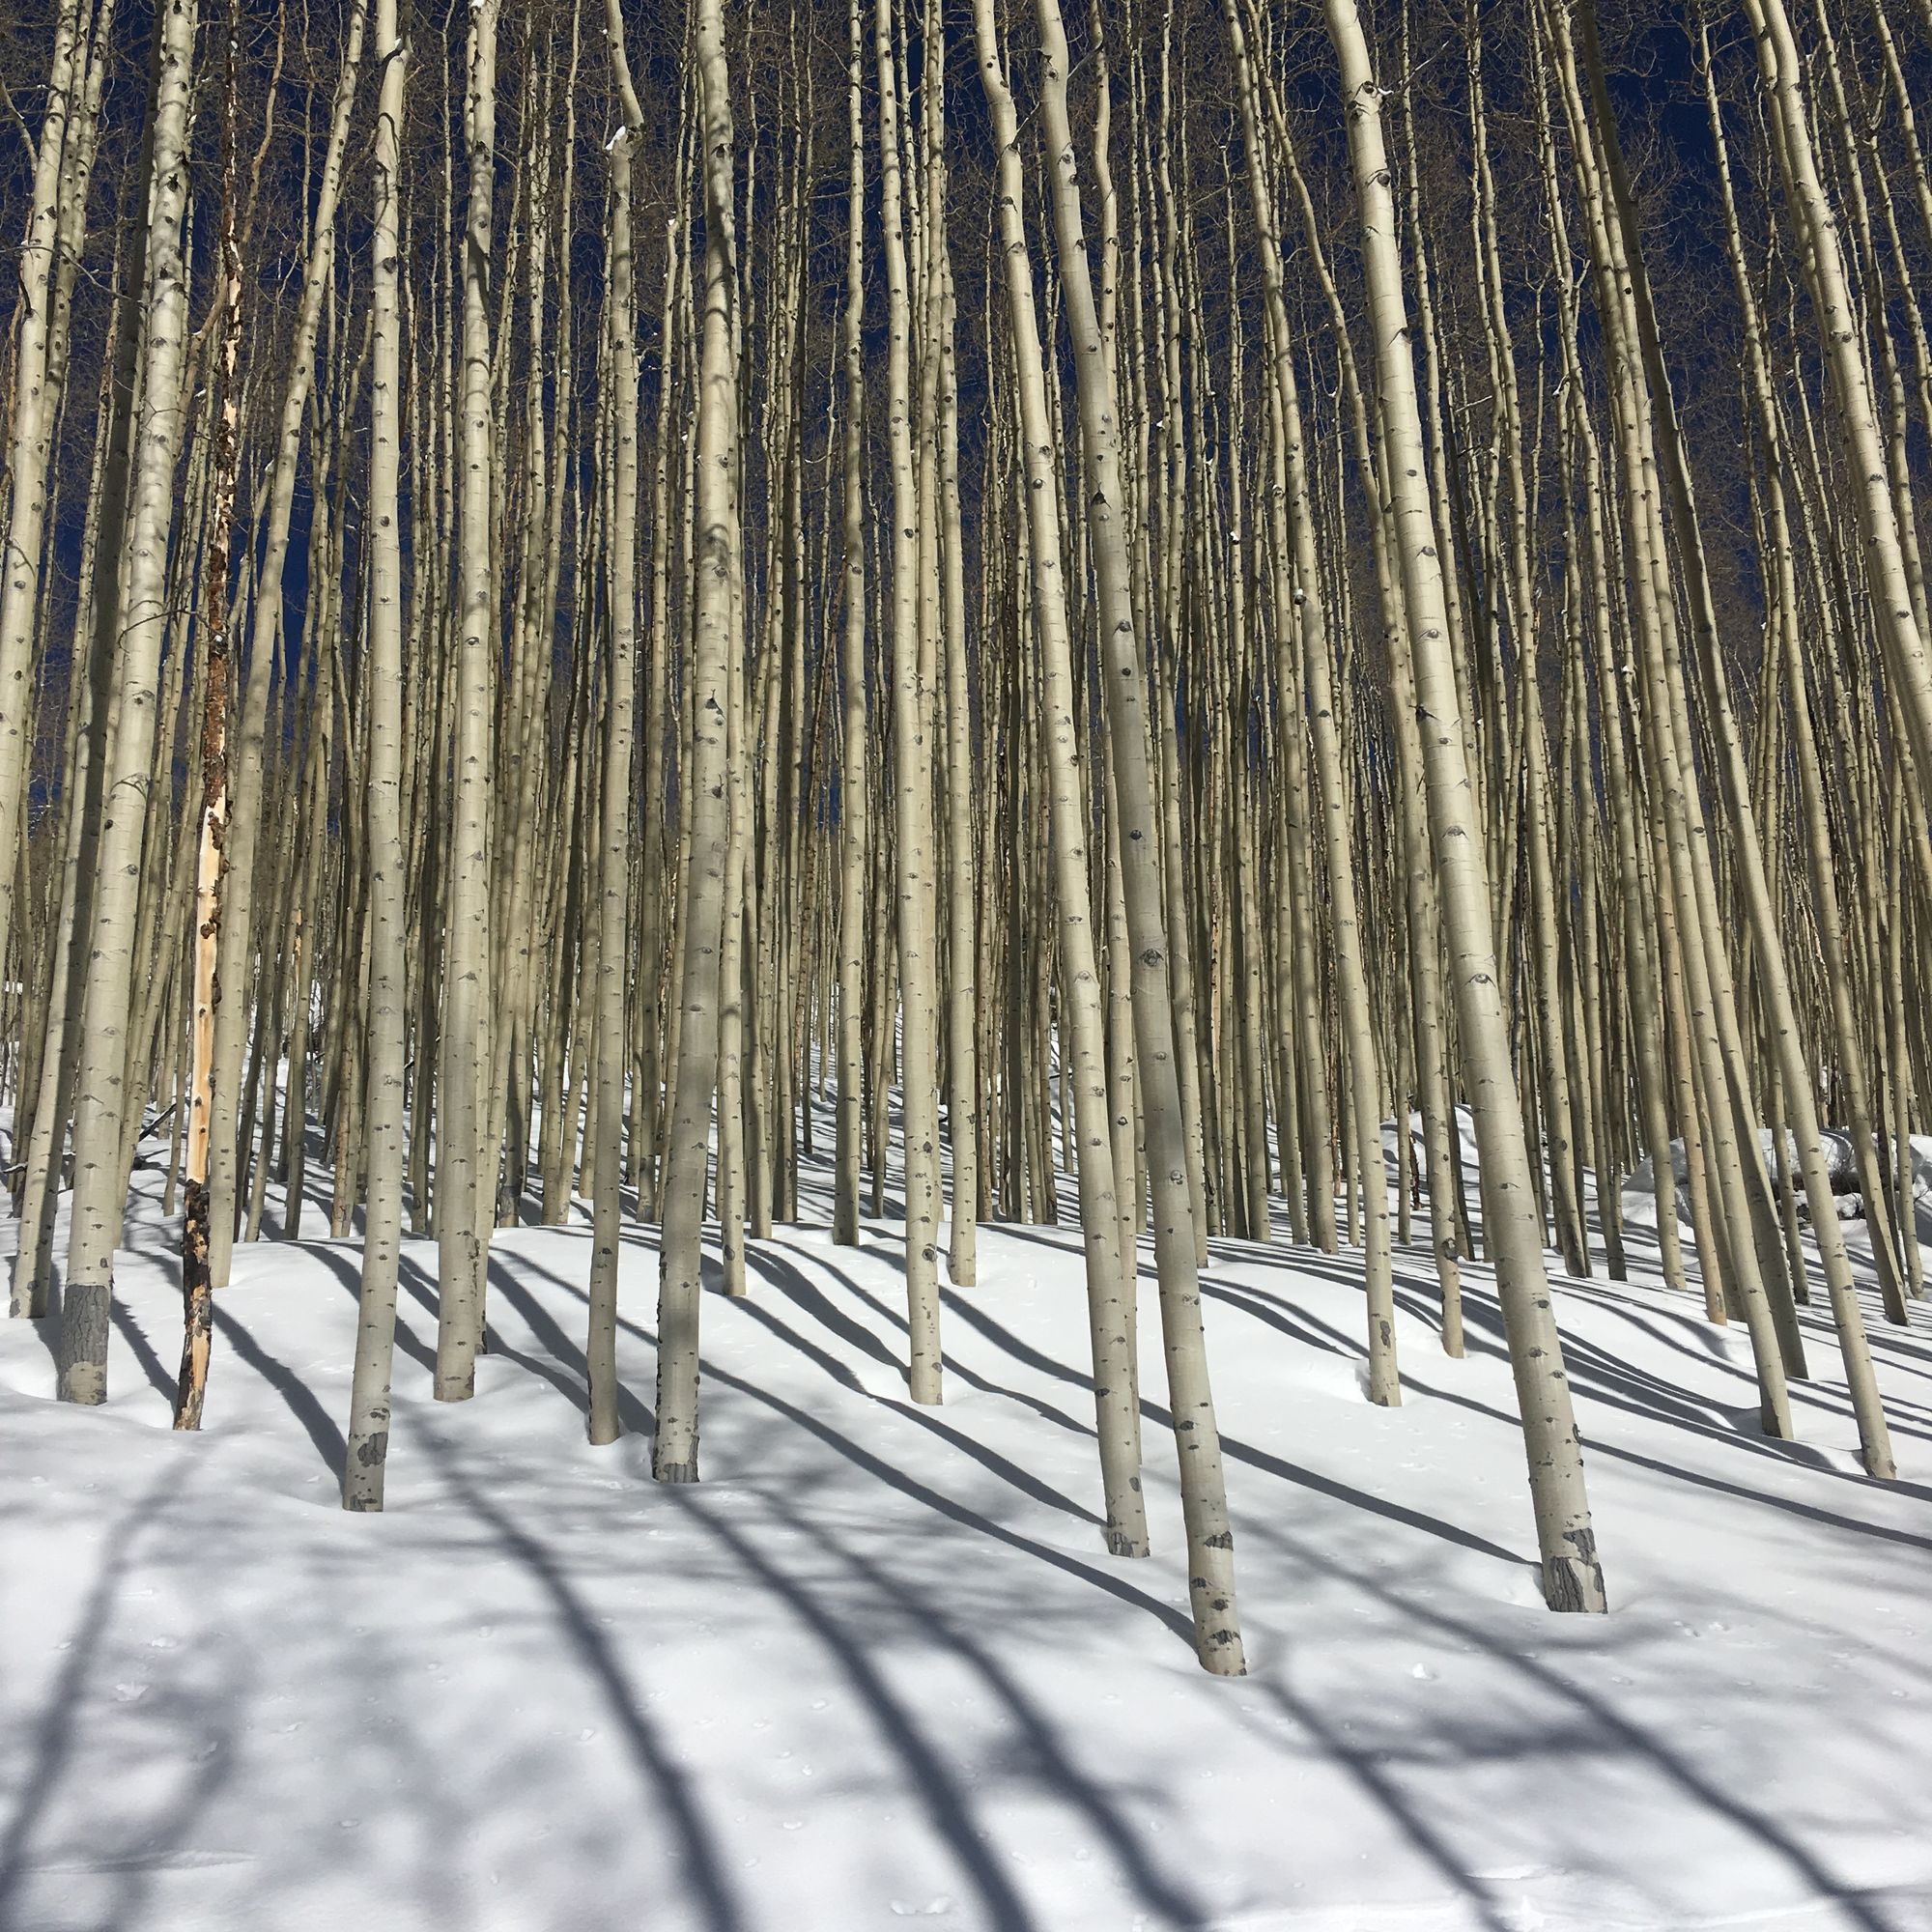 looking through an aspen grove in winter, untouched white snow with stark trunks of white barked aspen trees jut into a blue sky